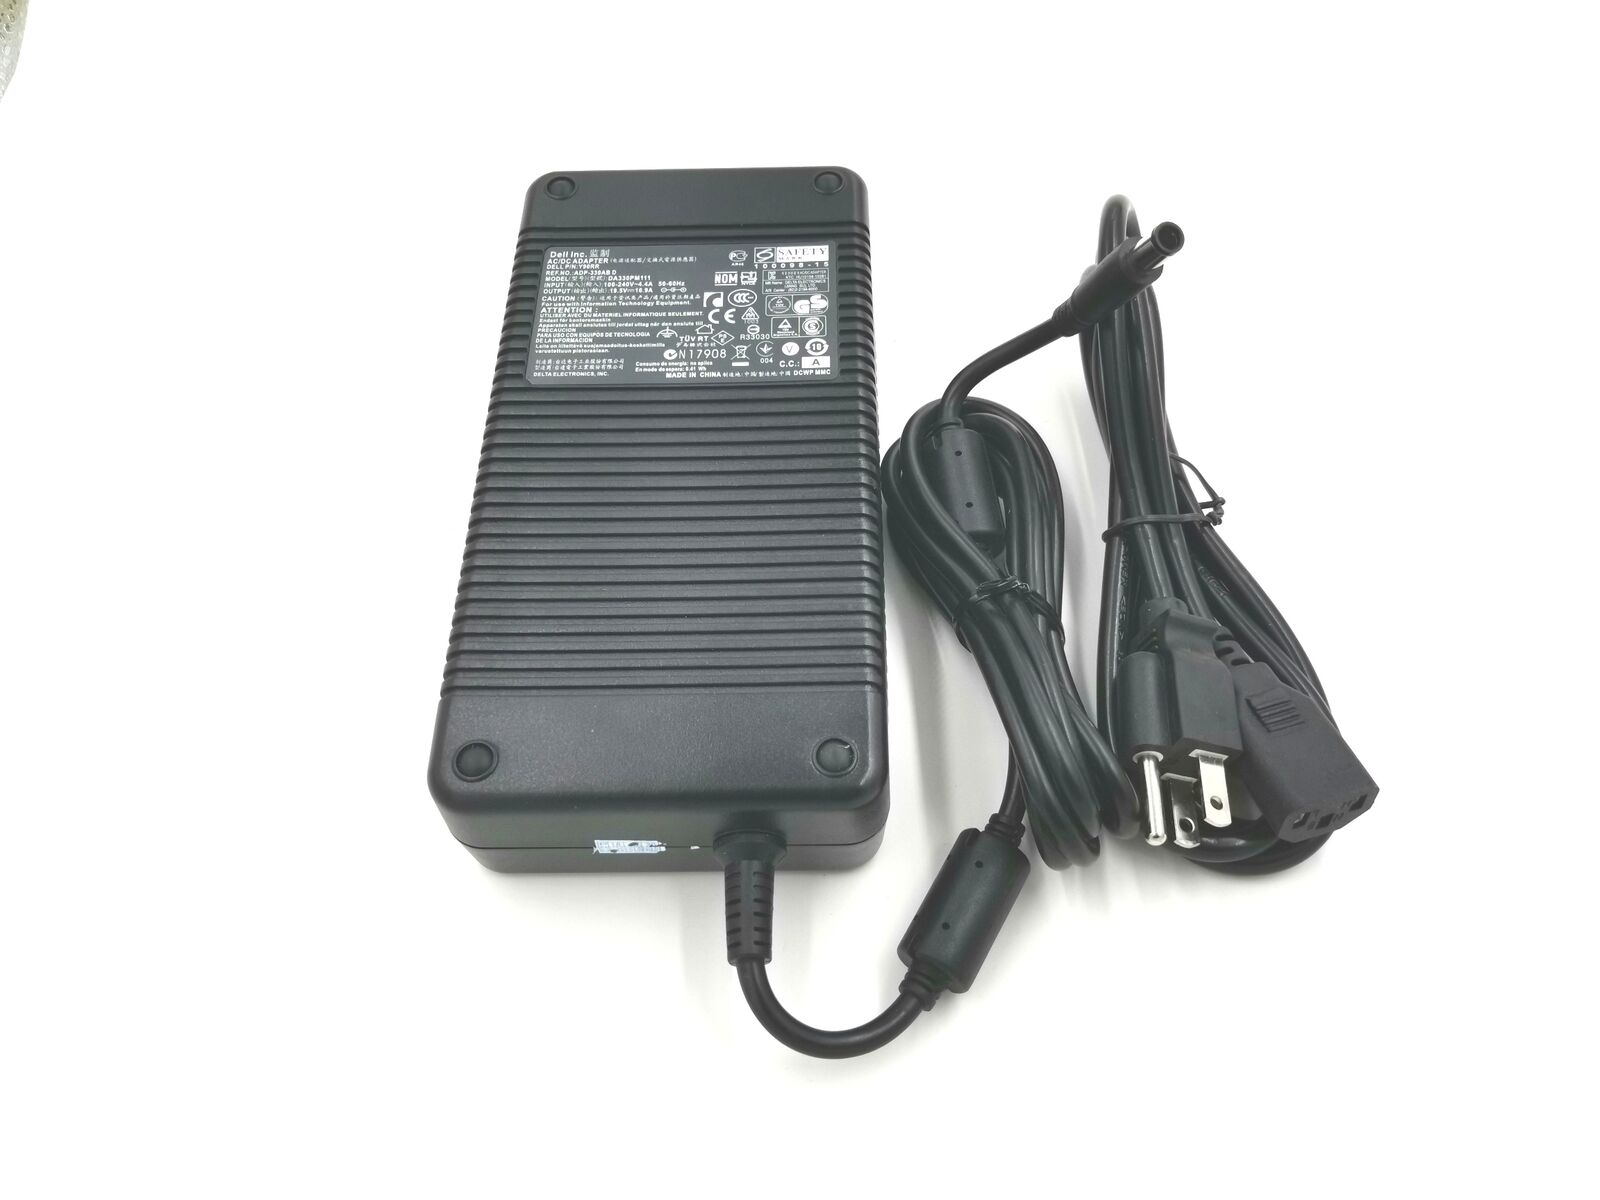 New 19.5V 16.9A Dell 330W Alienware M18x R1 R2 R3 AC/DC Power Adapter Charger